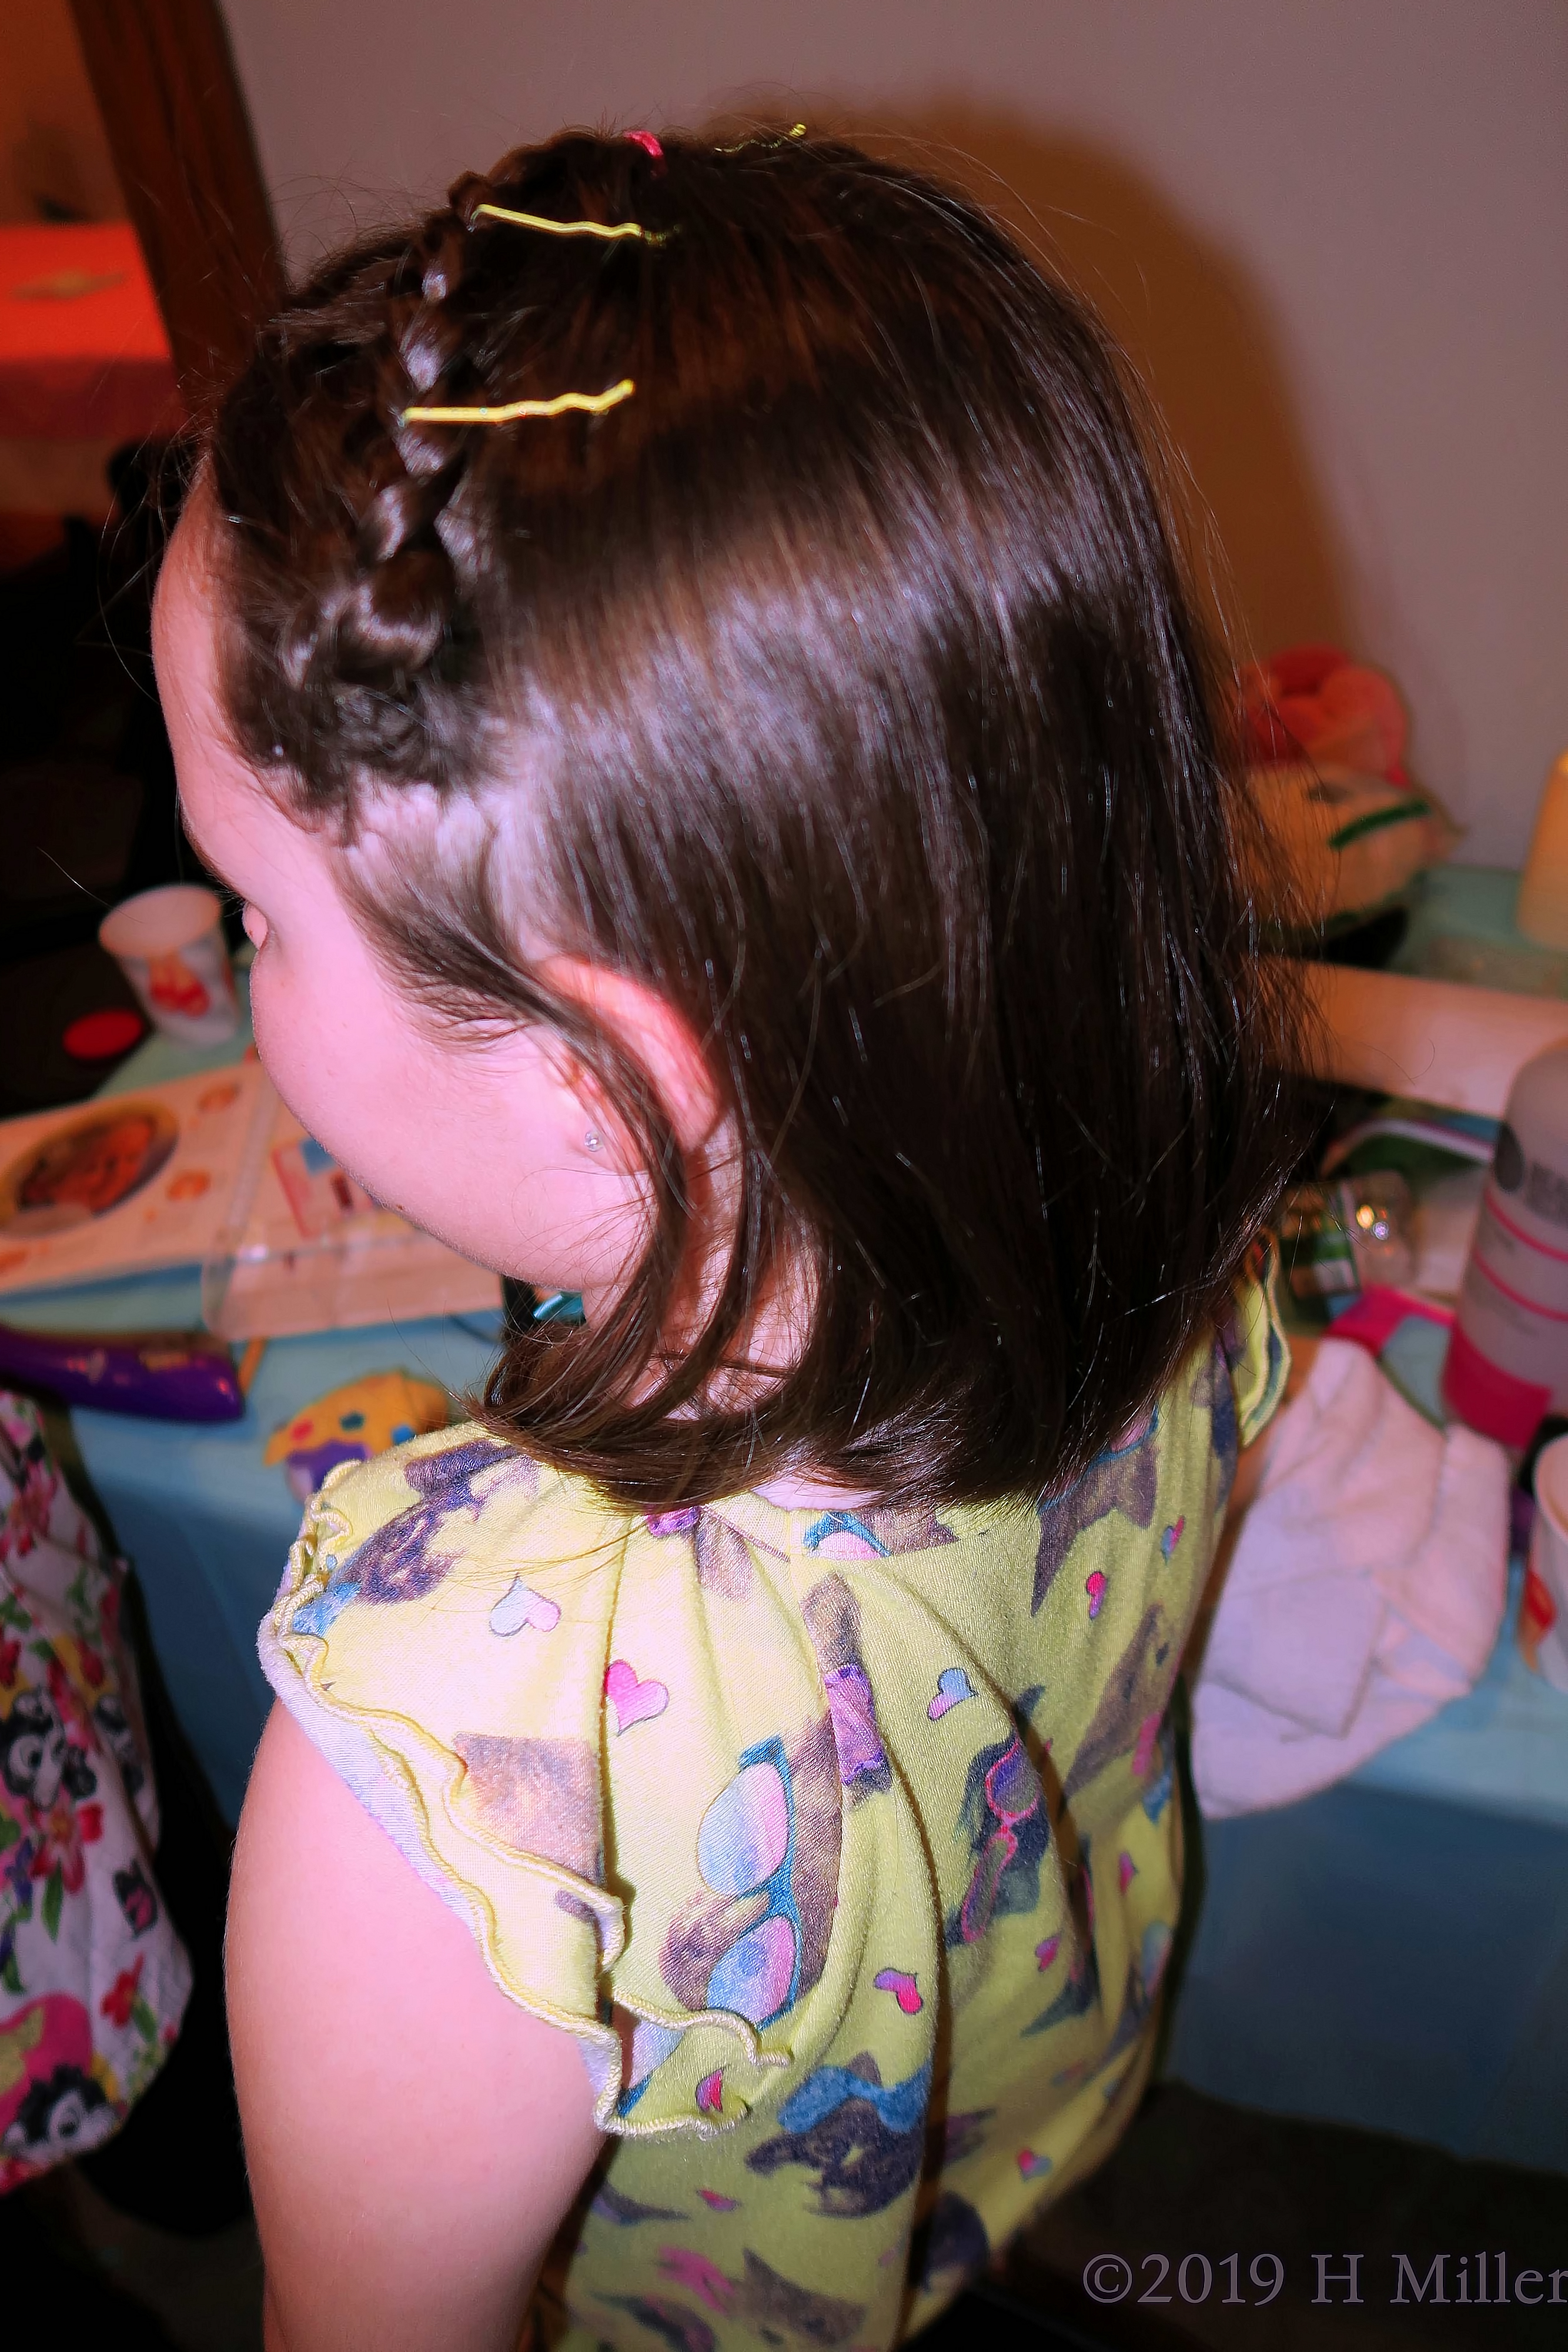 Braided With Barrettes! Kids Hairstyle On Spa Party Guest! 4